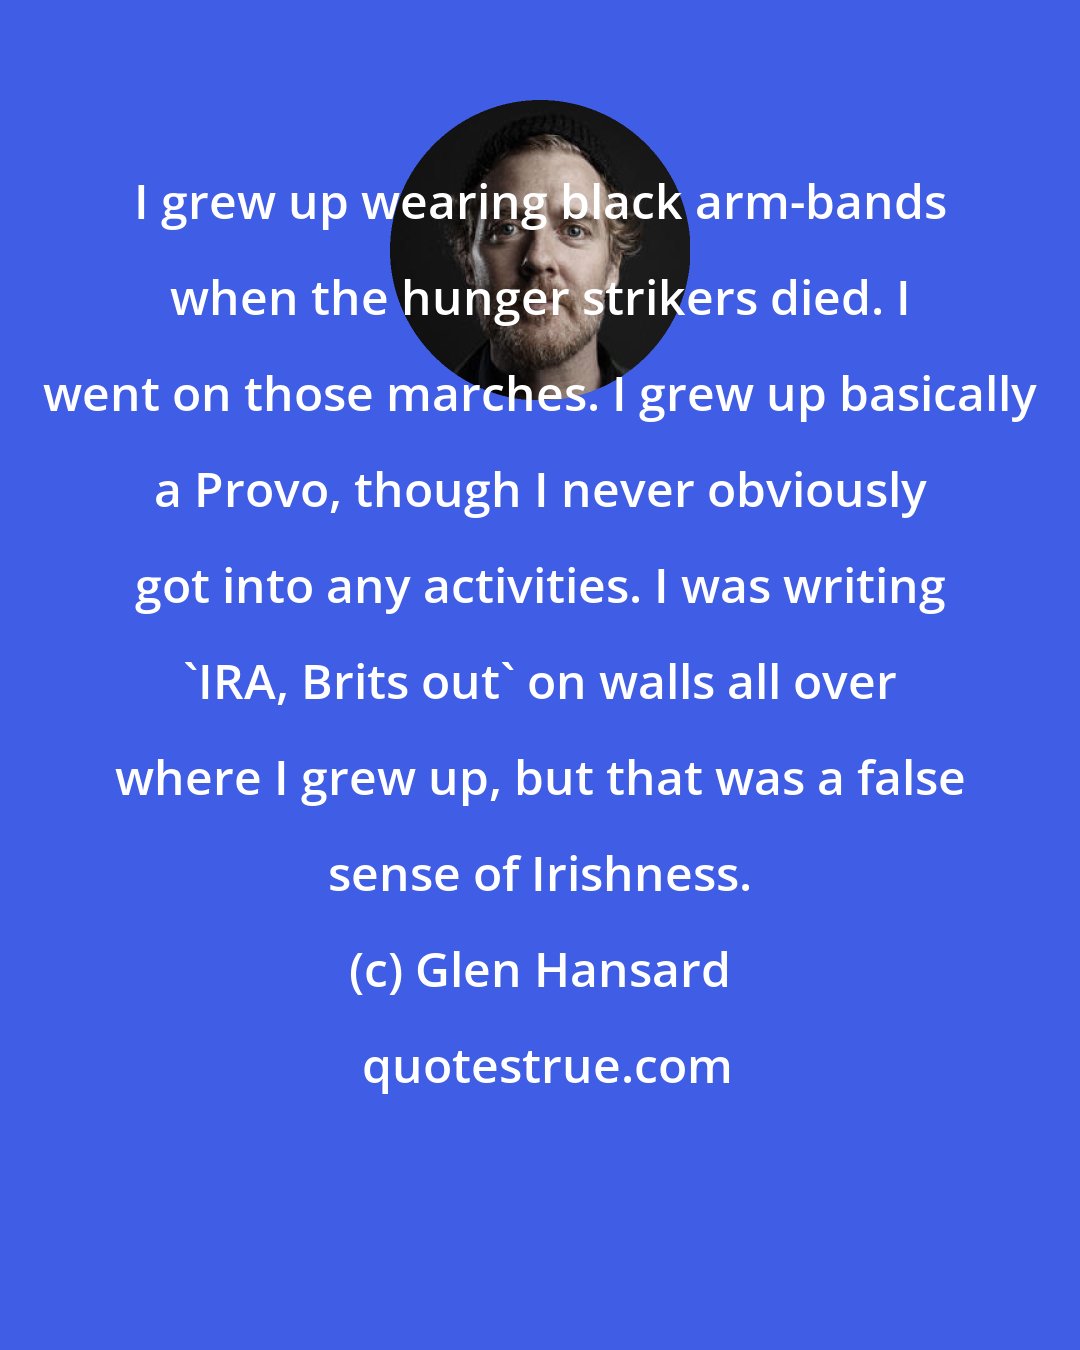 Glen Hansard: I grew up wearing black arm-bands when the hunger strikers died. I went on those marches. I grew up basically a Provo, though I never obviously got into any activities. I was writing 'IRA, Brits out' on walls all over where I grew up, but that was a false sense of Irishness.